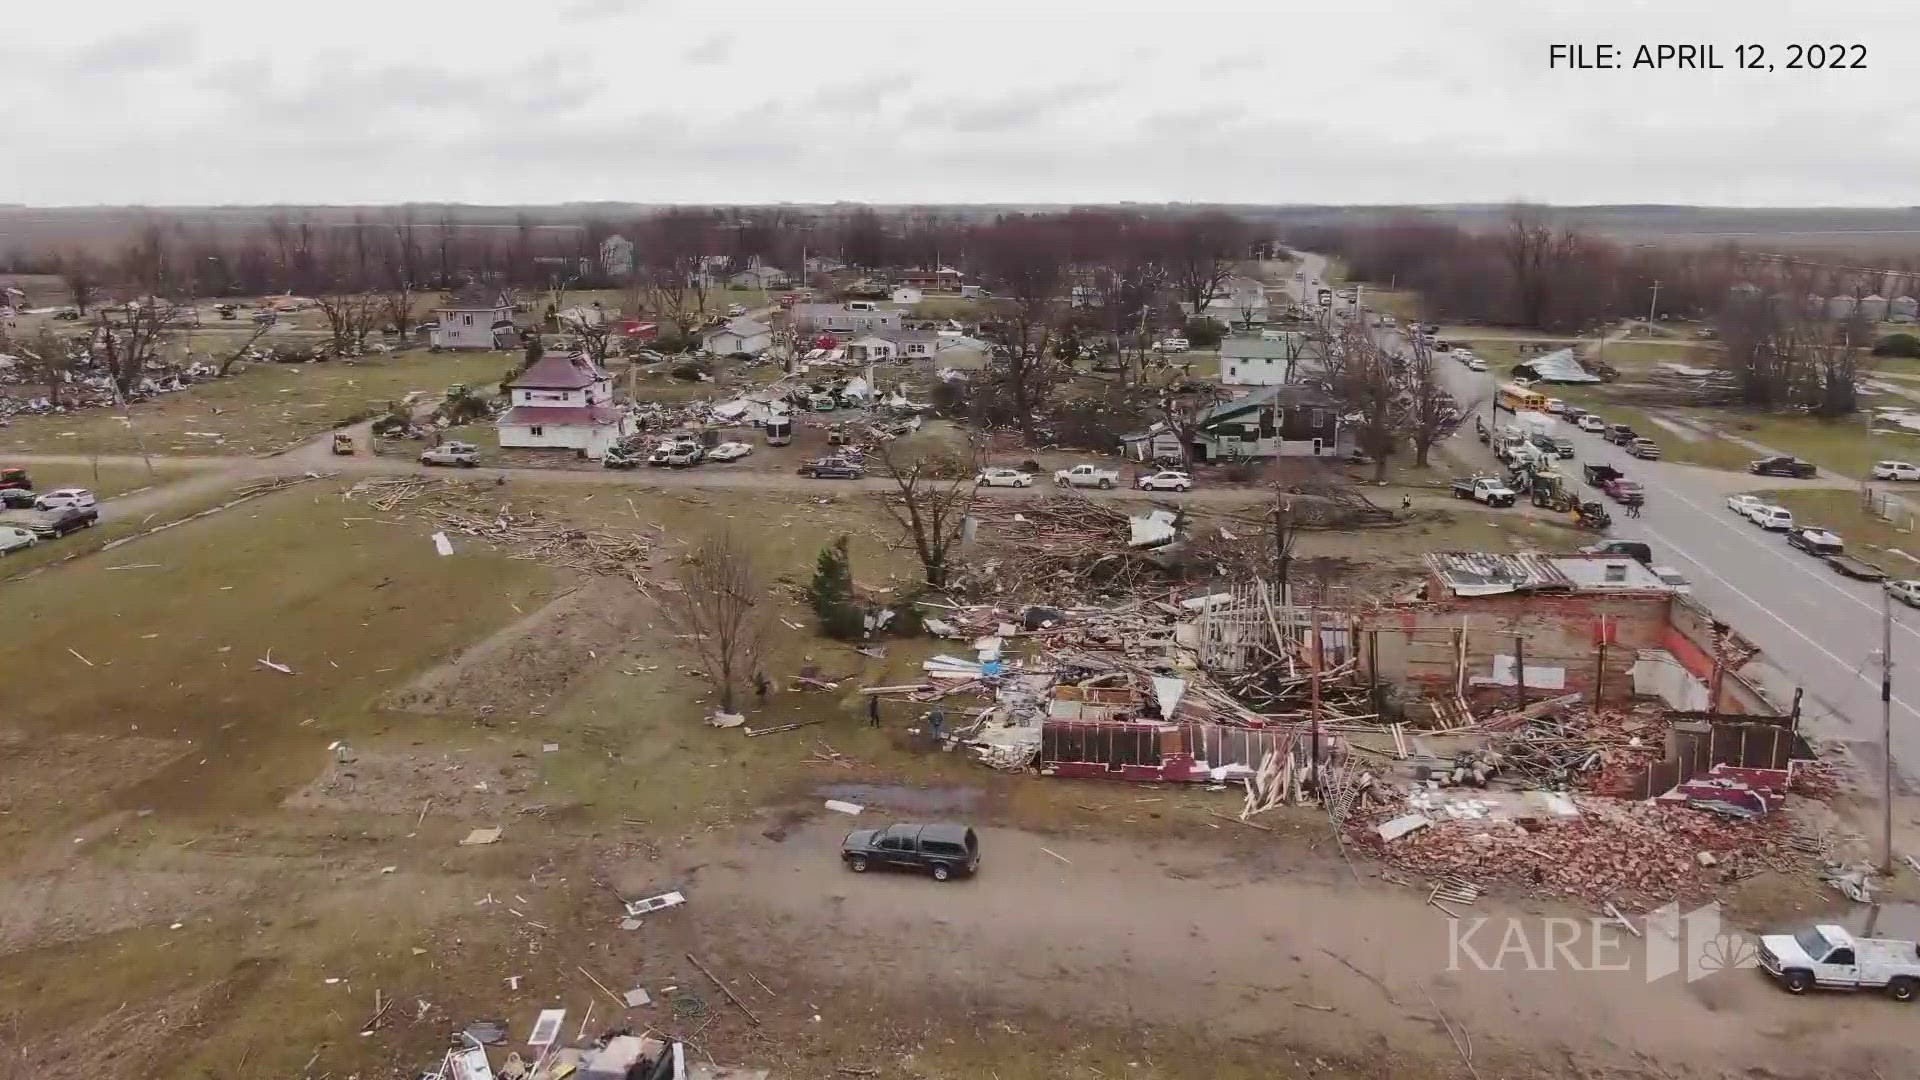 On April 12, 2022, an EF2 tornado was on the ground for five to six miles across southeastern Minnesota and took direct aim at the small town of Taopi.